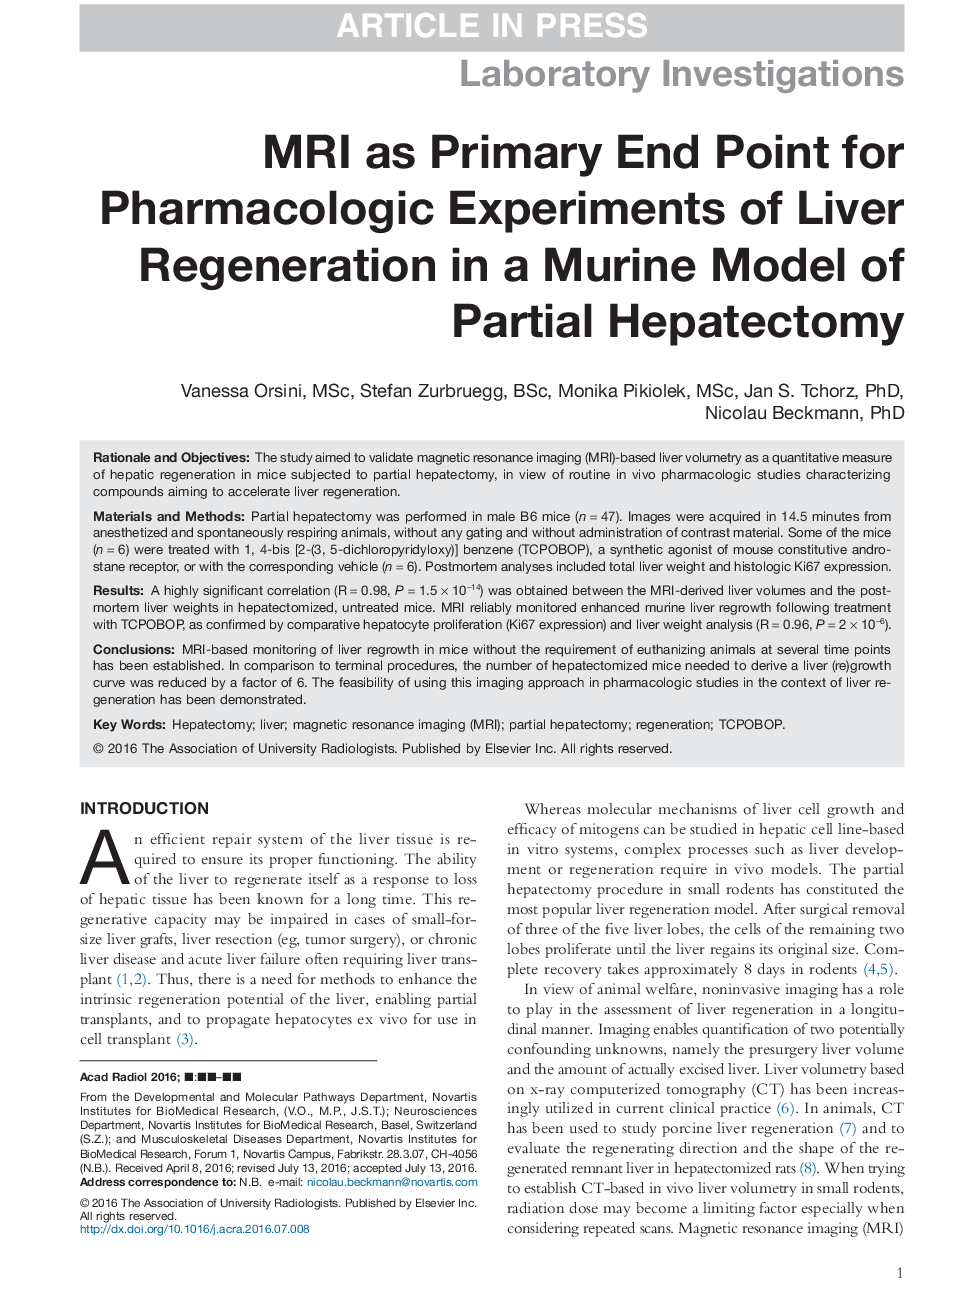 MRI as Primary End Point for Pharmacologic Experiments of Liver Regeneration in a Murine Model of Partial Hepatectomy